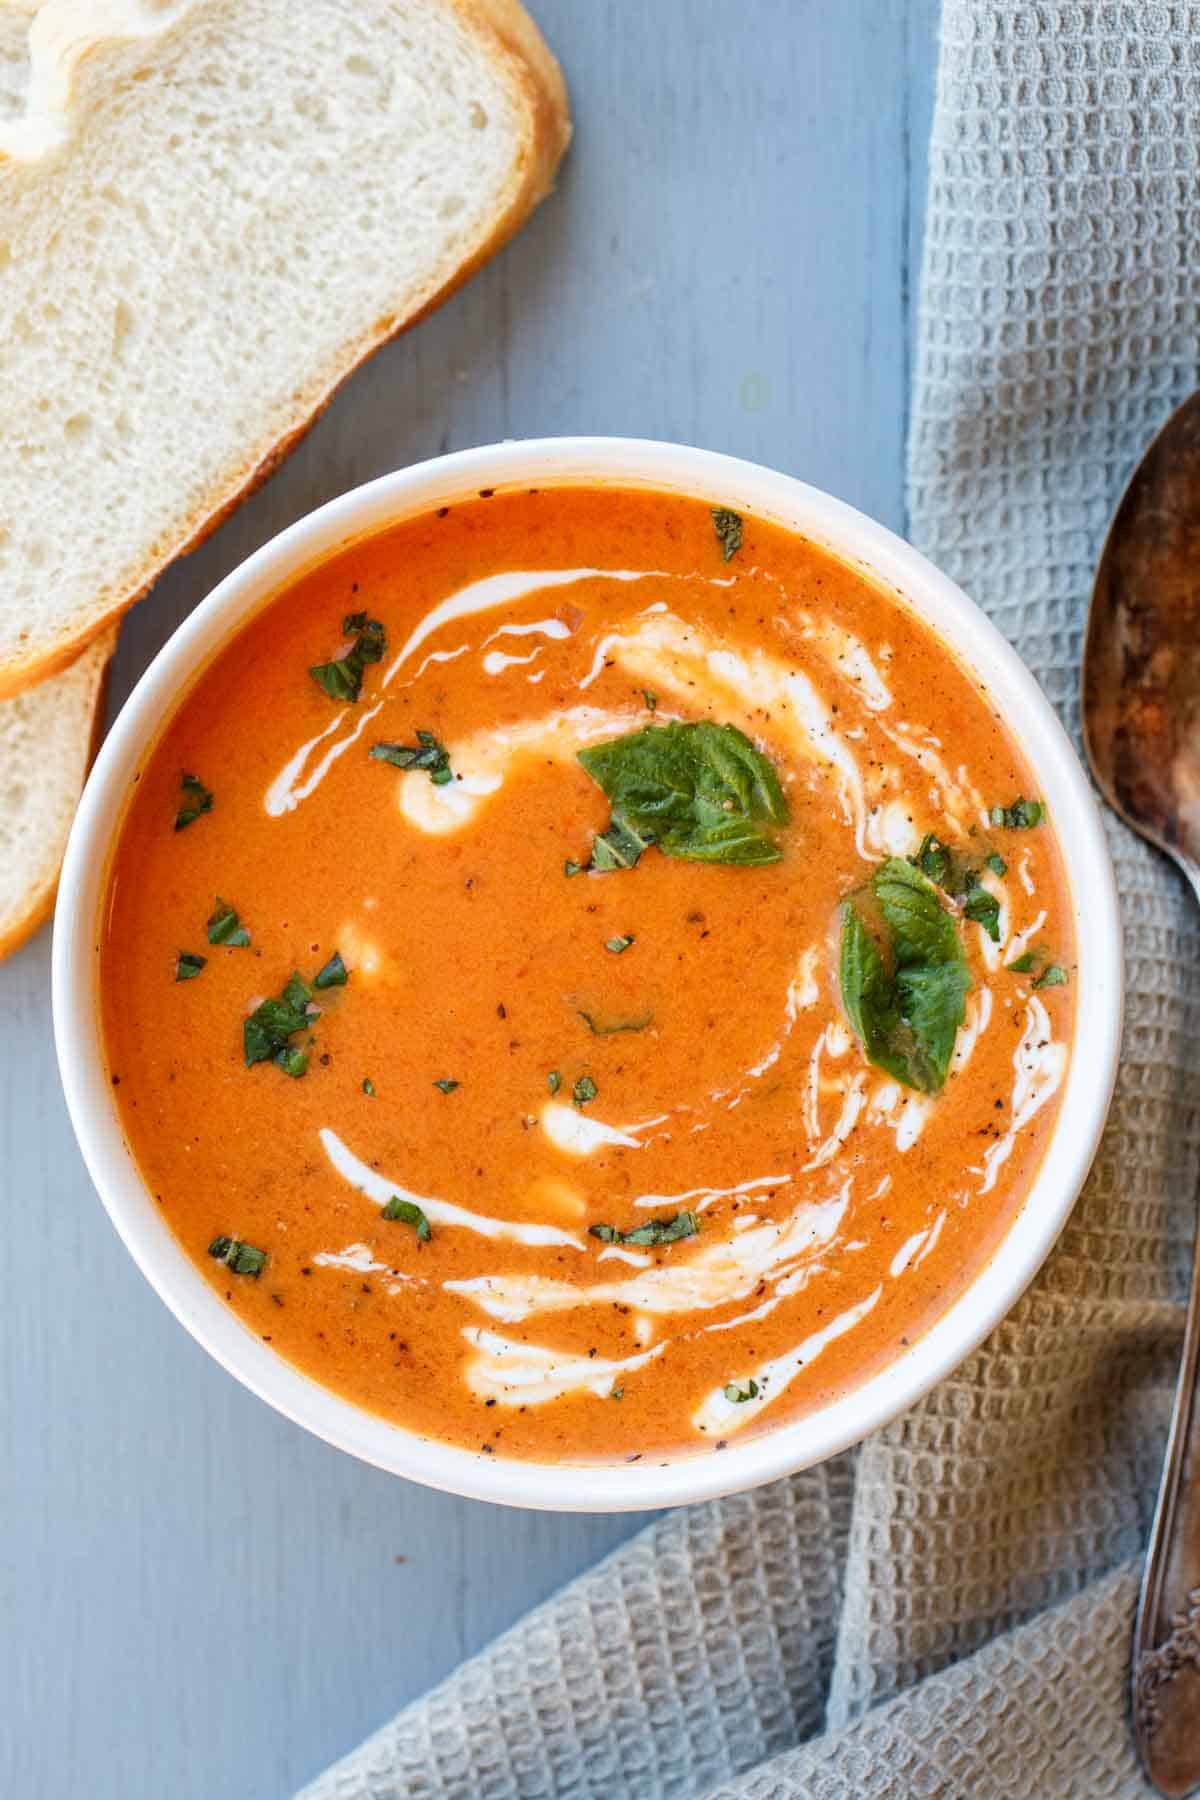 Rich tomato soup plated with a side of frsh bread.